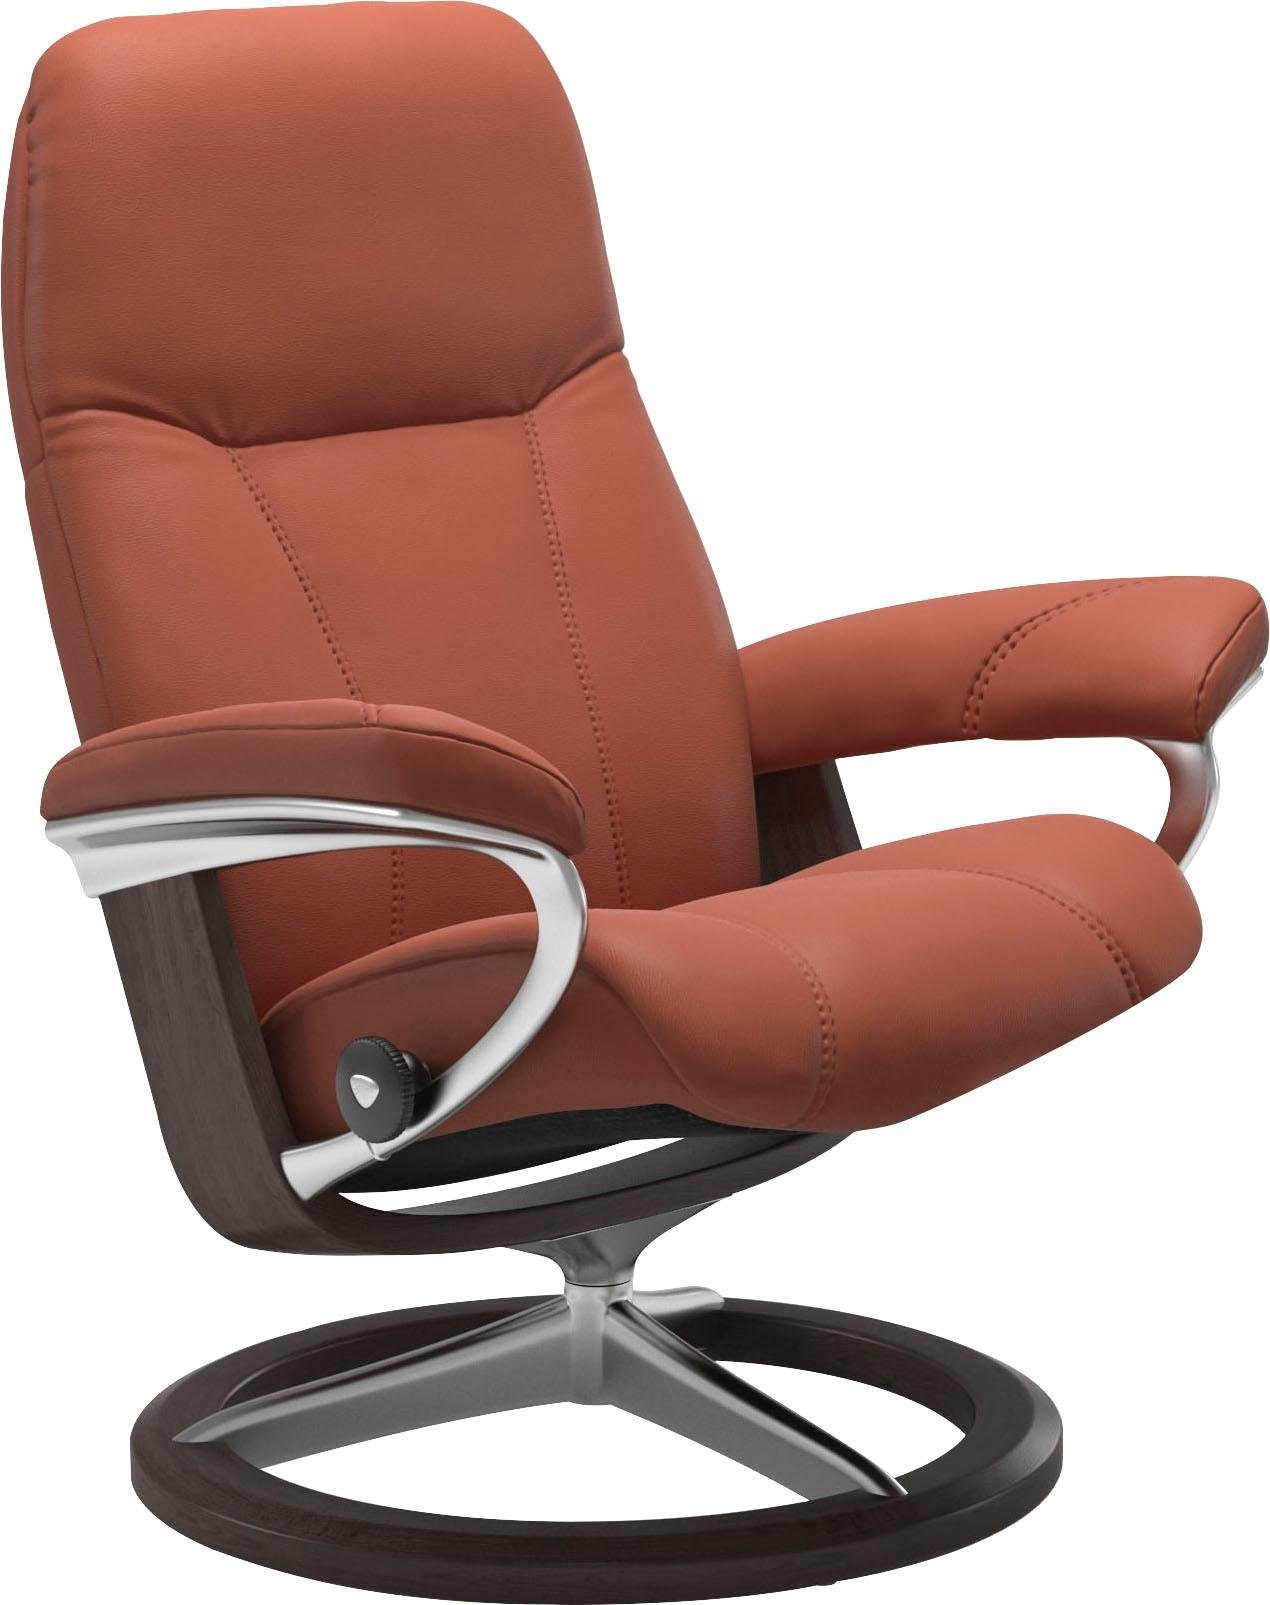 mit Wenge Größe Gestell Stressless® Consul, S, Base, Signature Relaxsessel